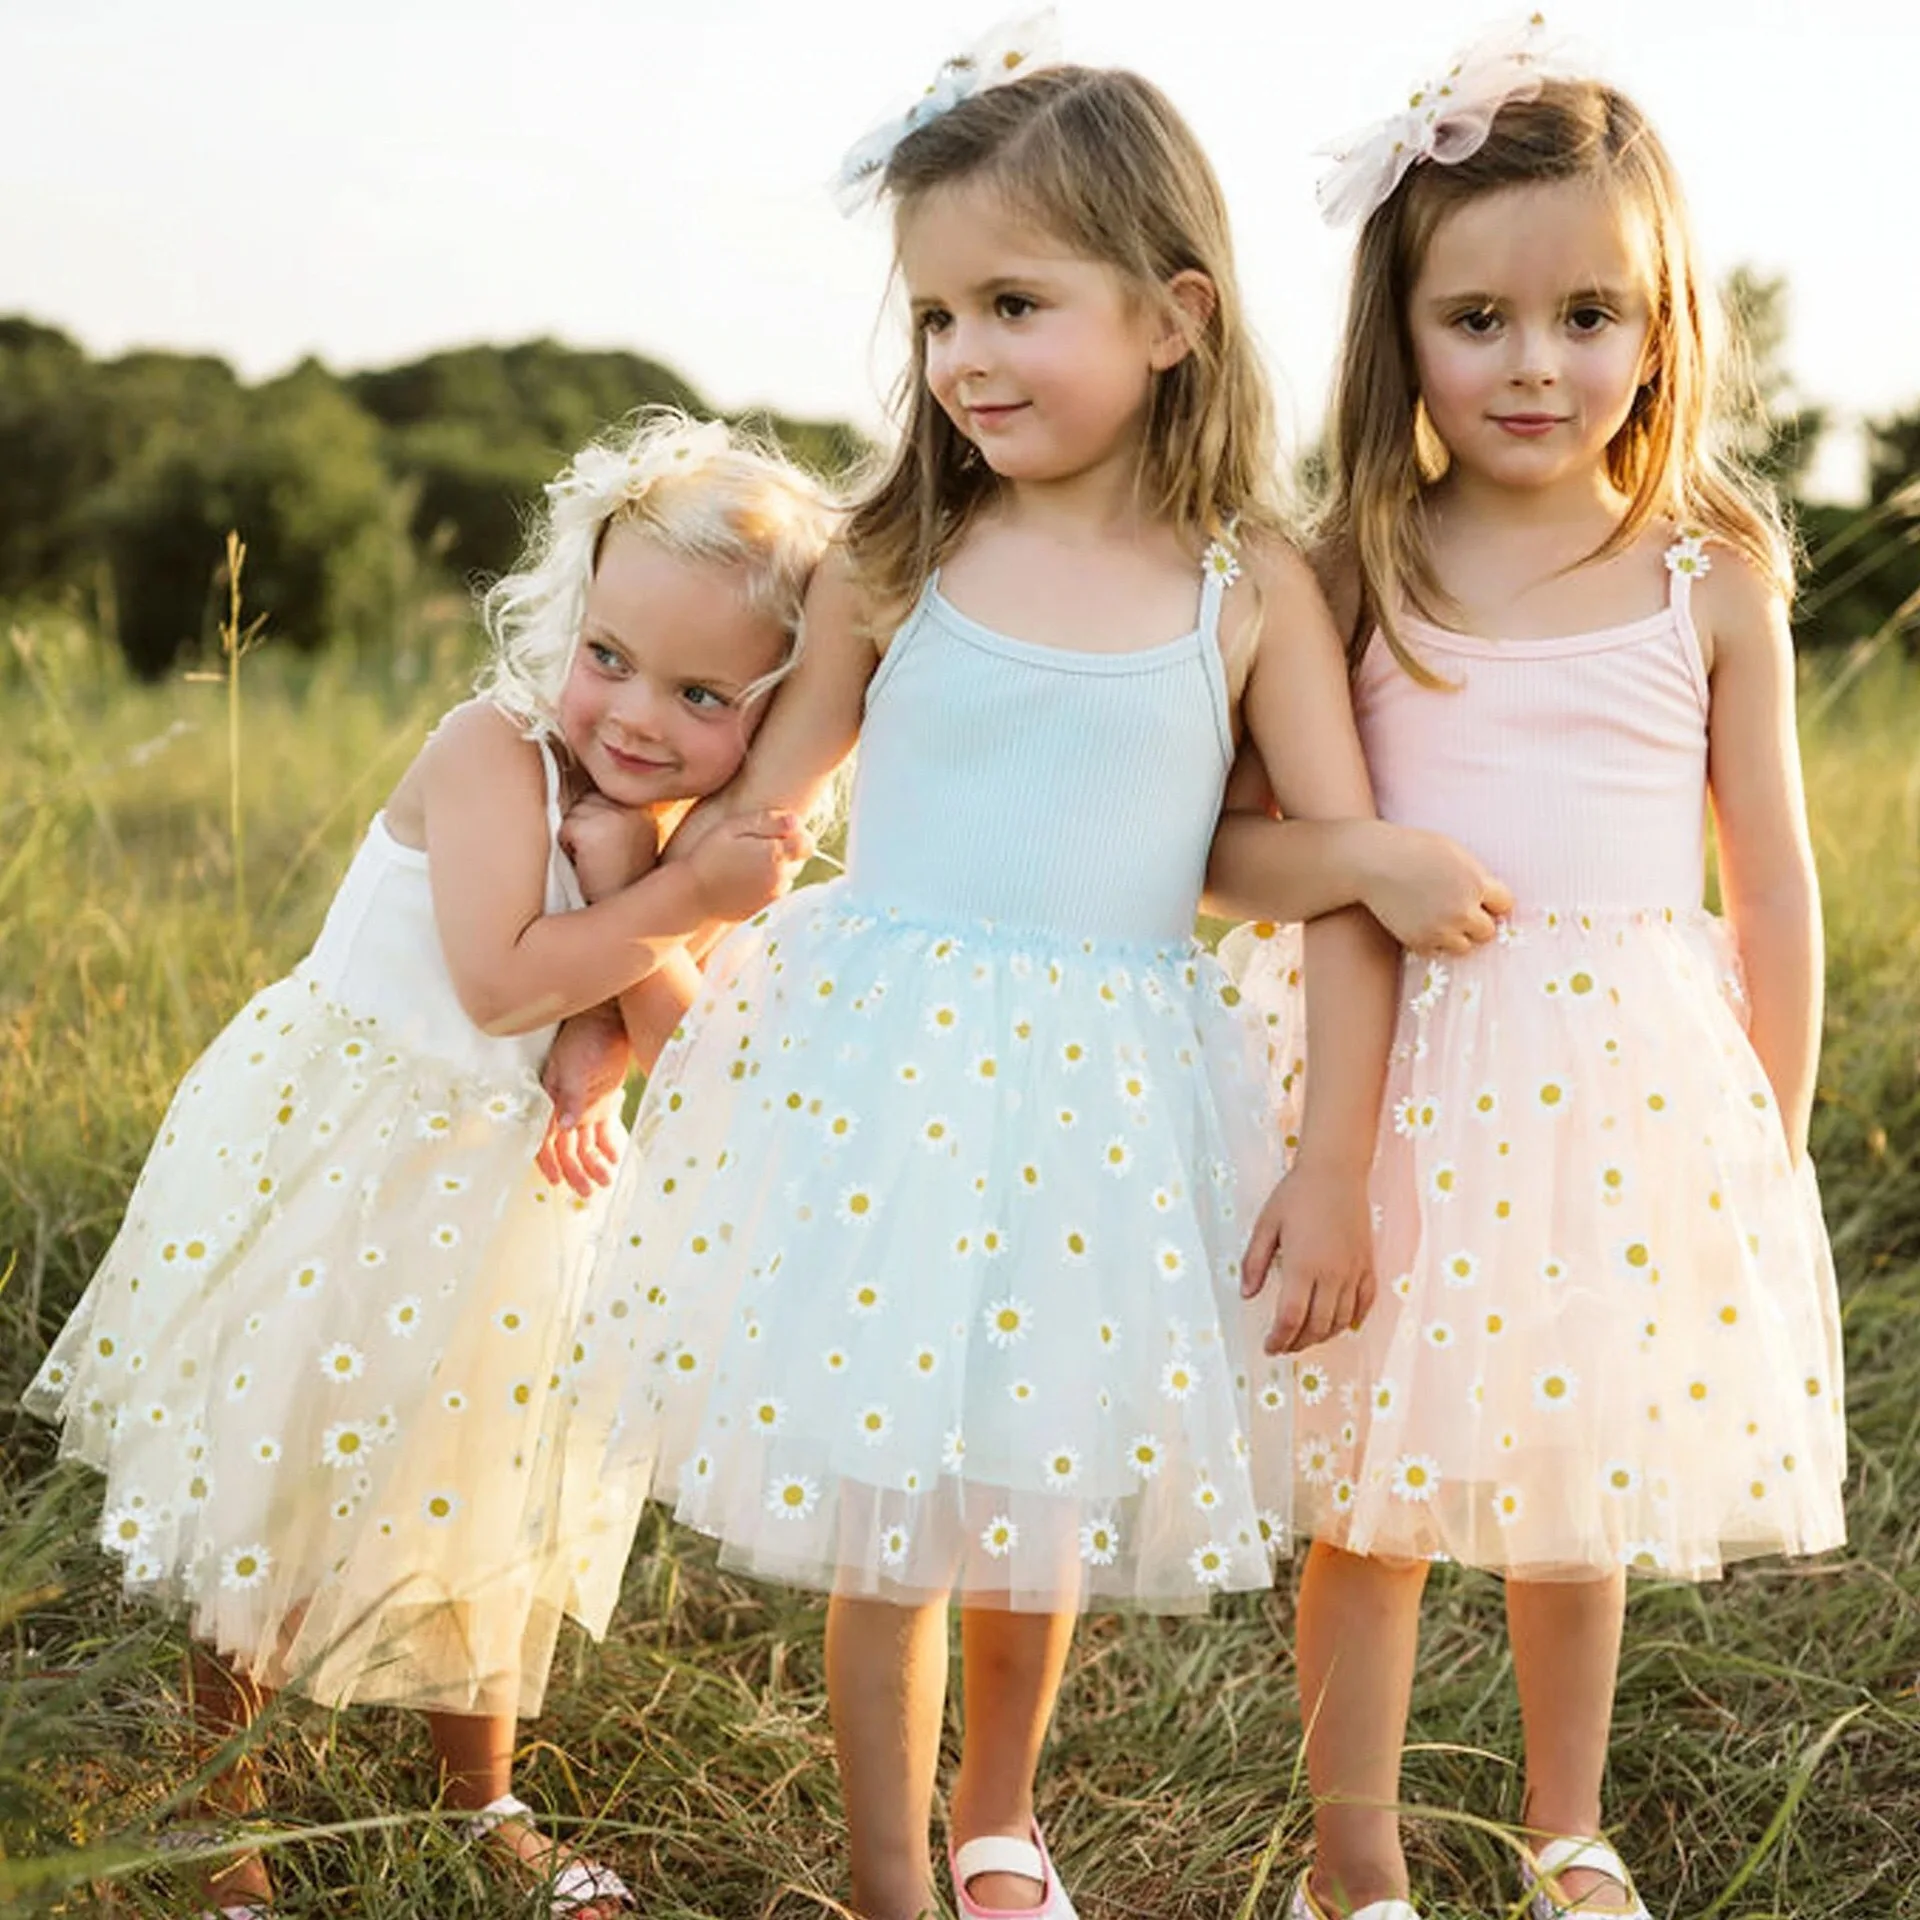 

ma&baby 6M-4Y Toddler Kids Baby Girls Tutu Dress Tulle Party Birthday Daisy Dresses For Girl Summer Sun Beach Holiday Clothing